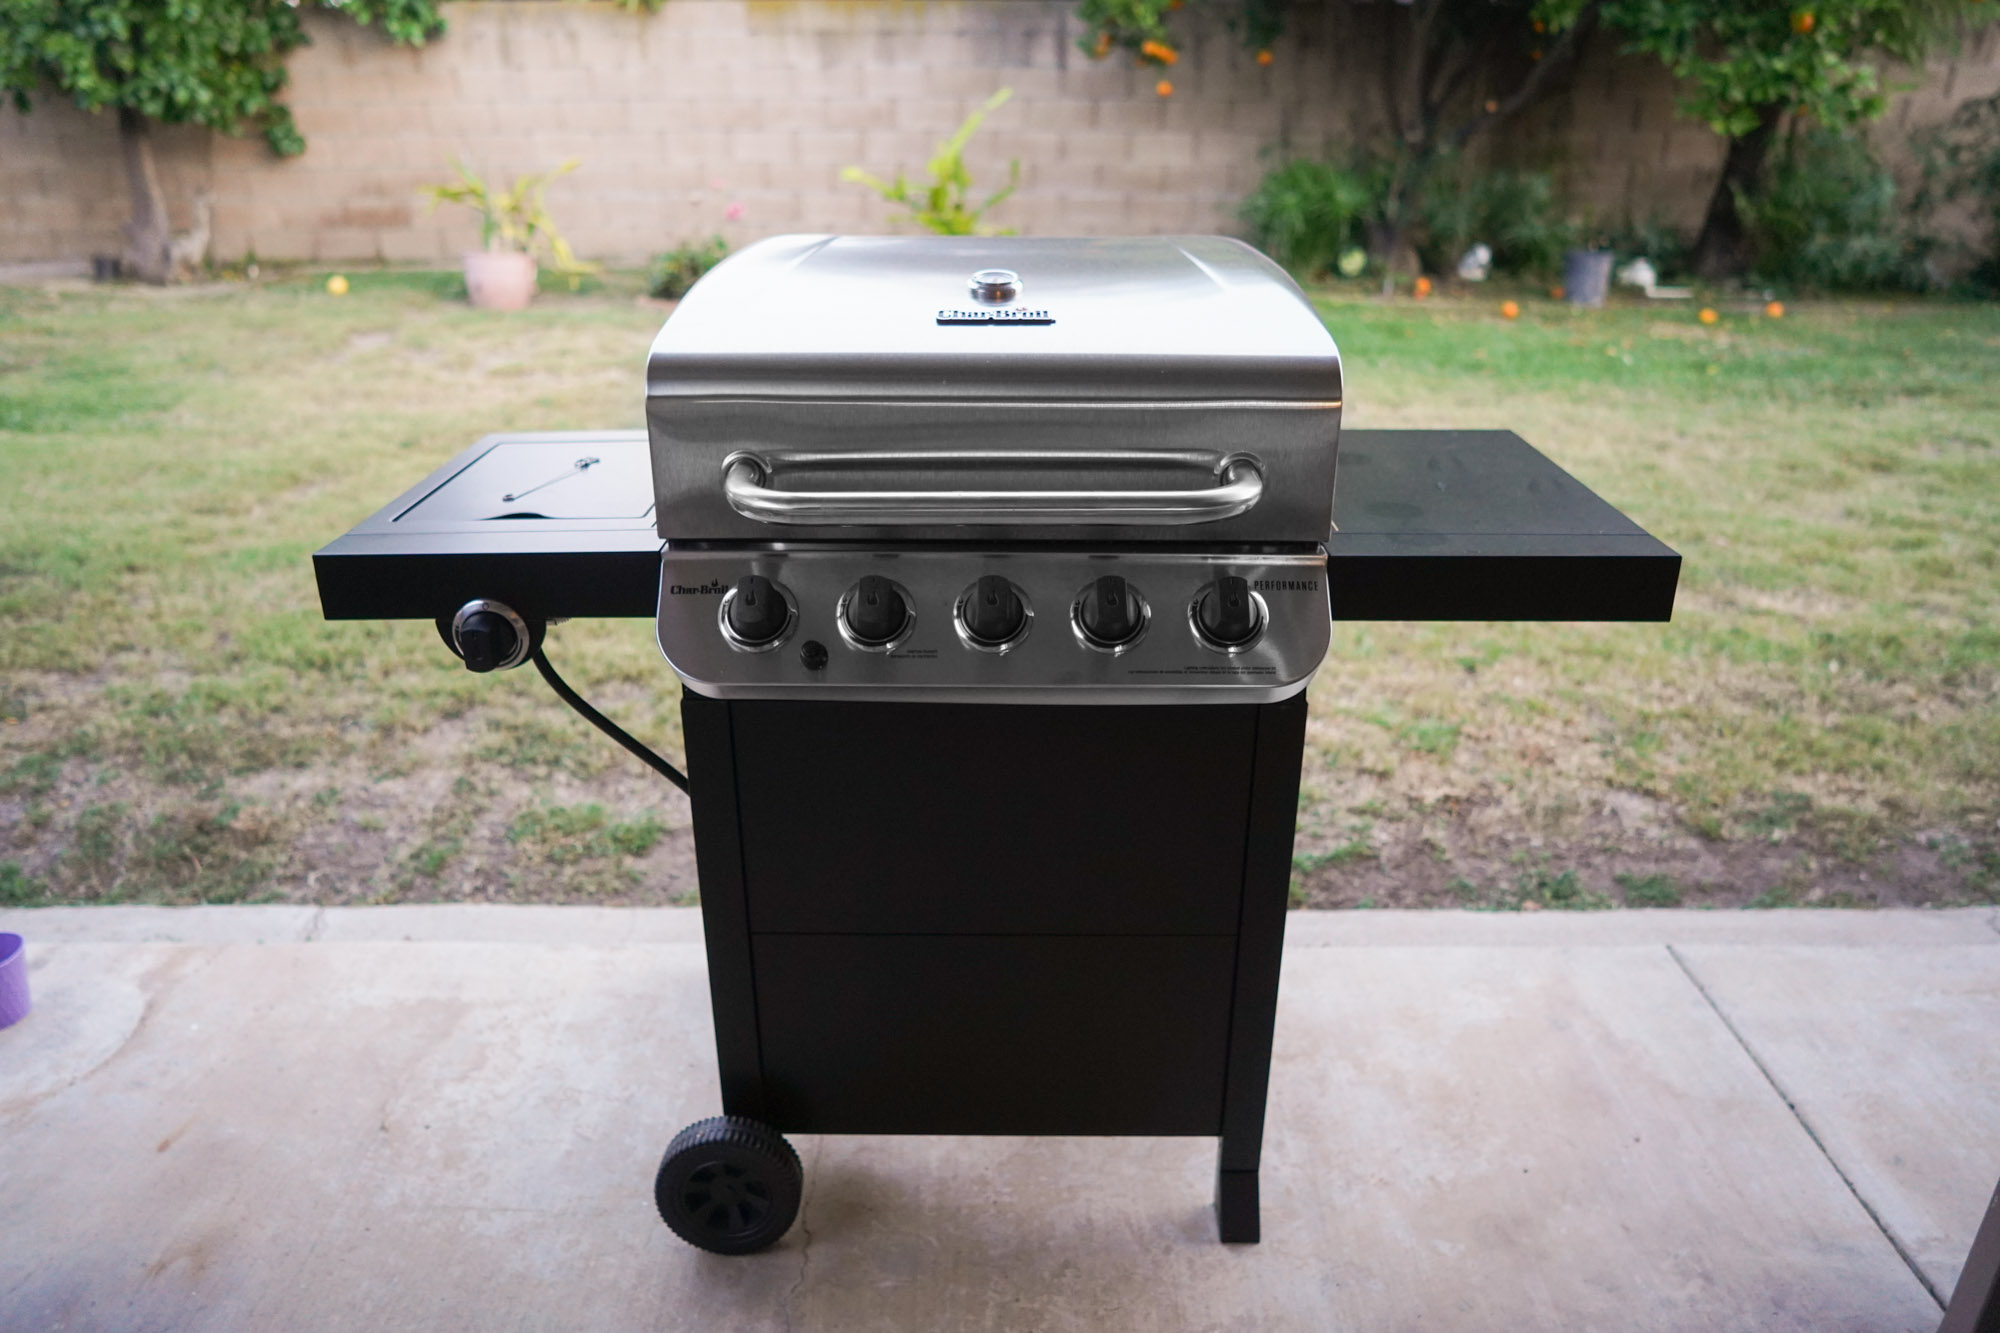 ryste lindre frakobling The Best Gas Grills of 2023 - Reviews by Your Best Digs